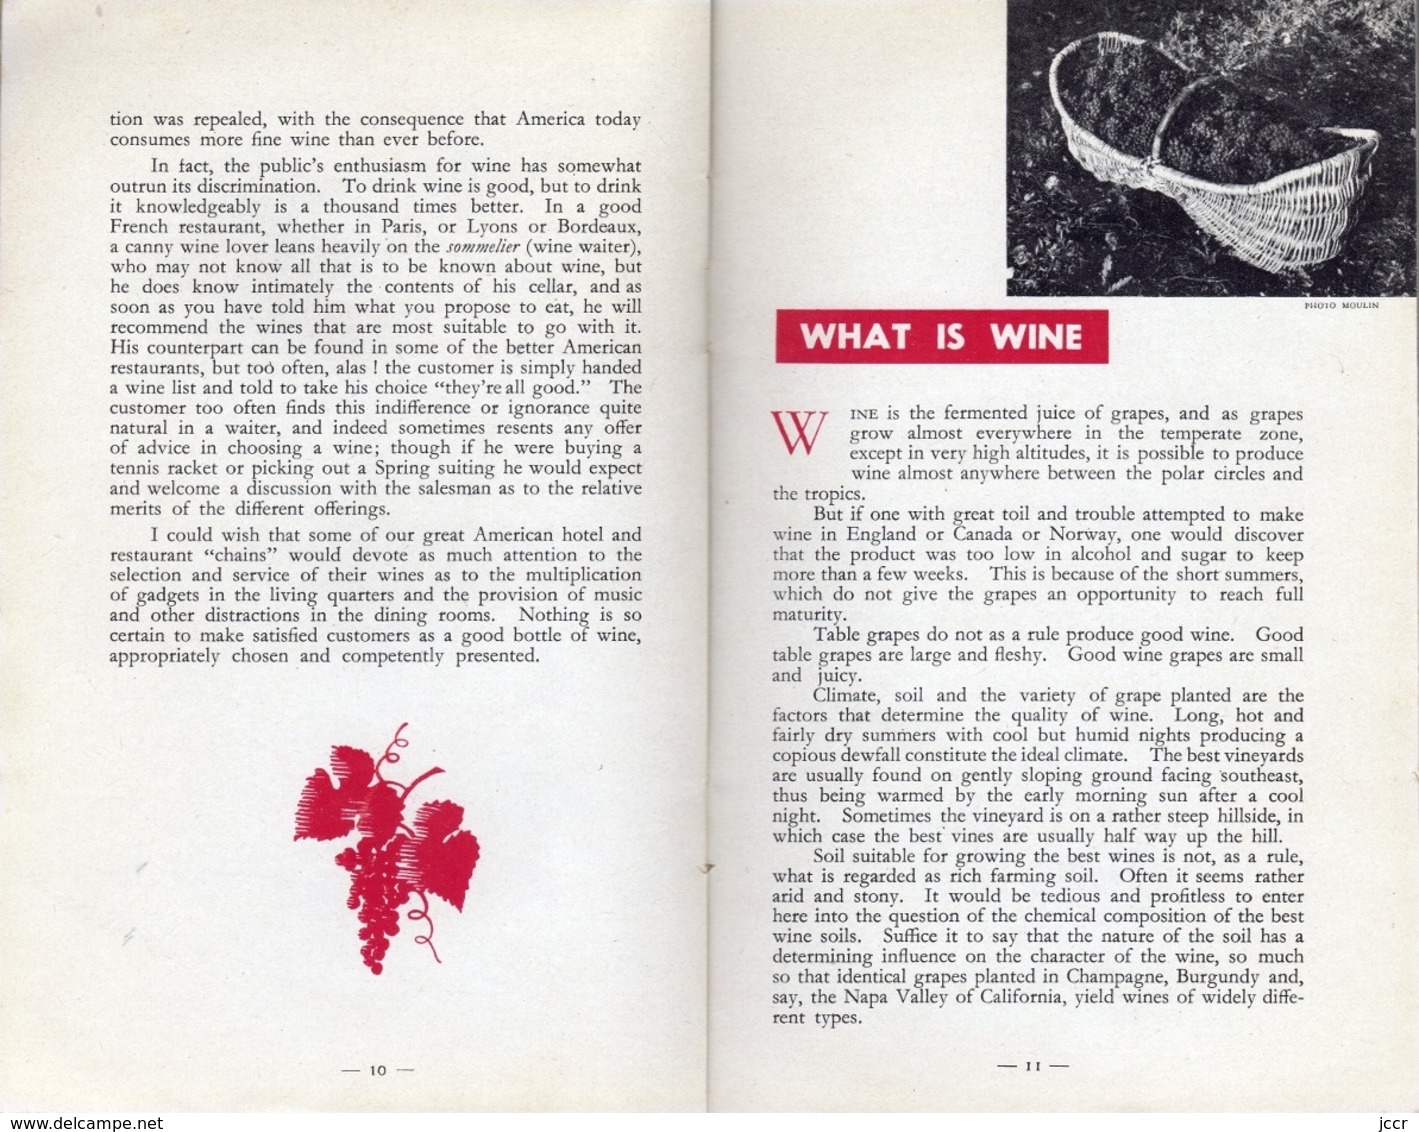 A Practical Guide for the Cellarman Wine-Butler and Connoisseur - French Wines by William Bird - 1955